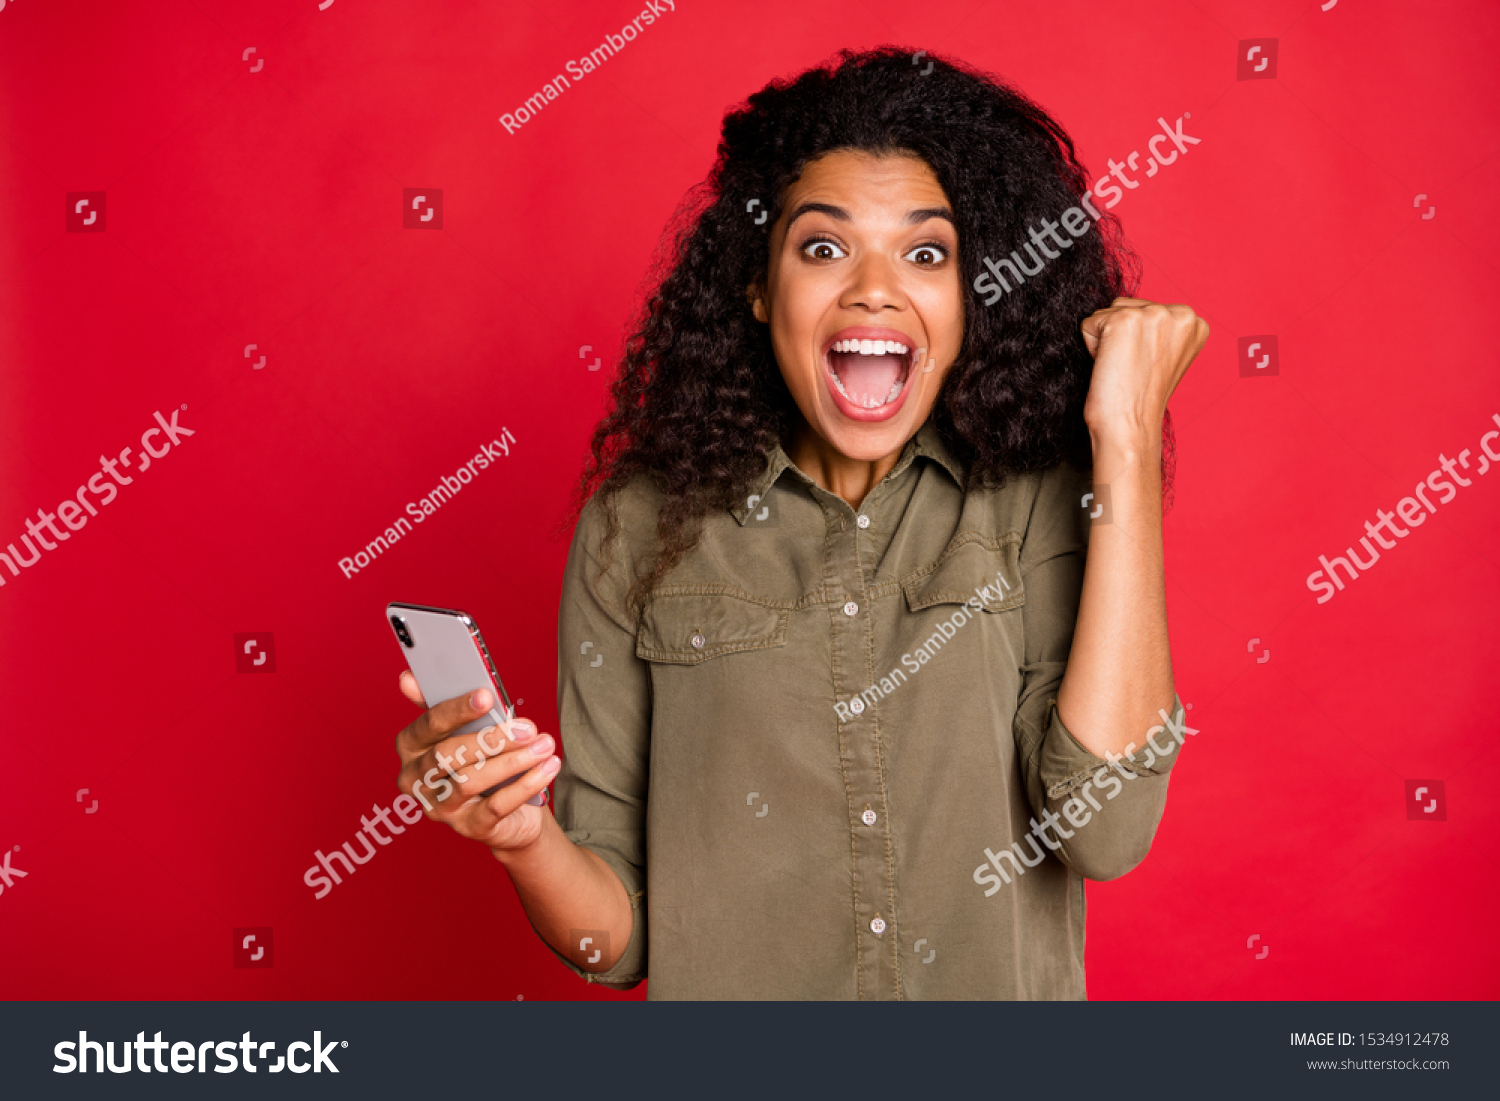 Photo of cheerful rejoicing curly wavy brunette youngster overjoyed with having won competitions shouting screaming brown haired expressing emotions feedback isolated vibrant color background #1534912478